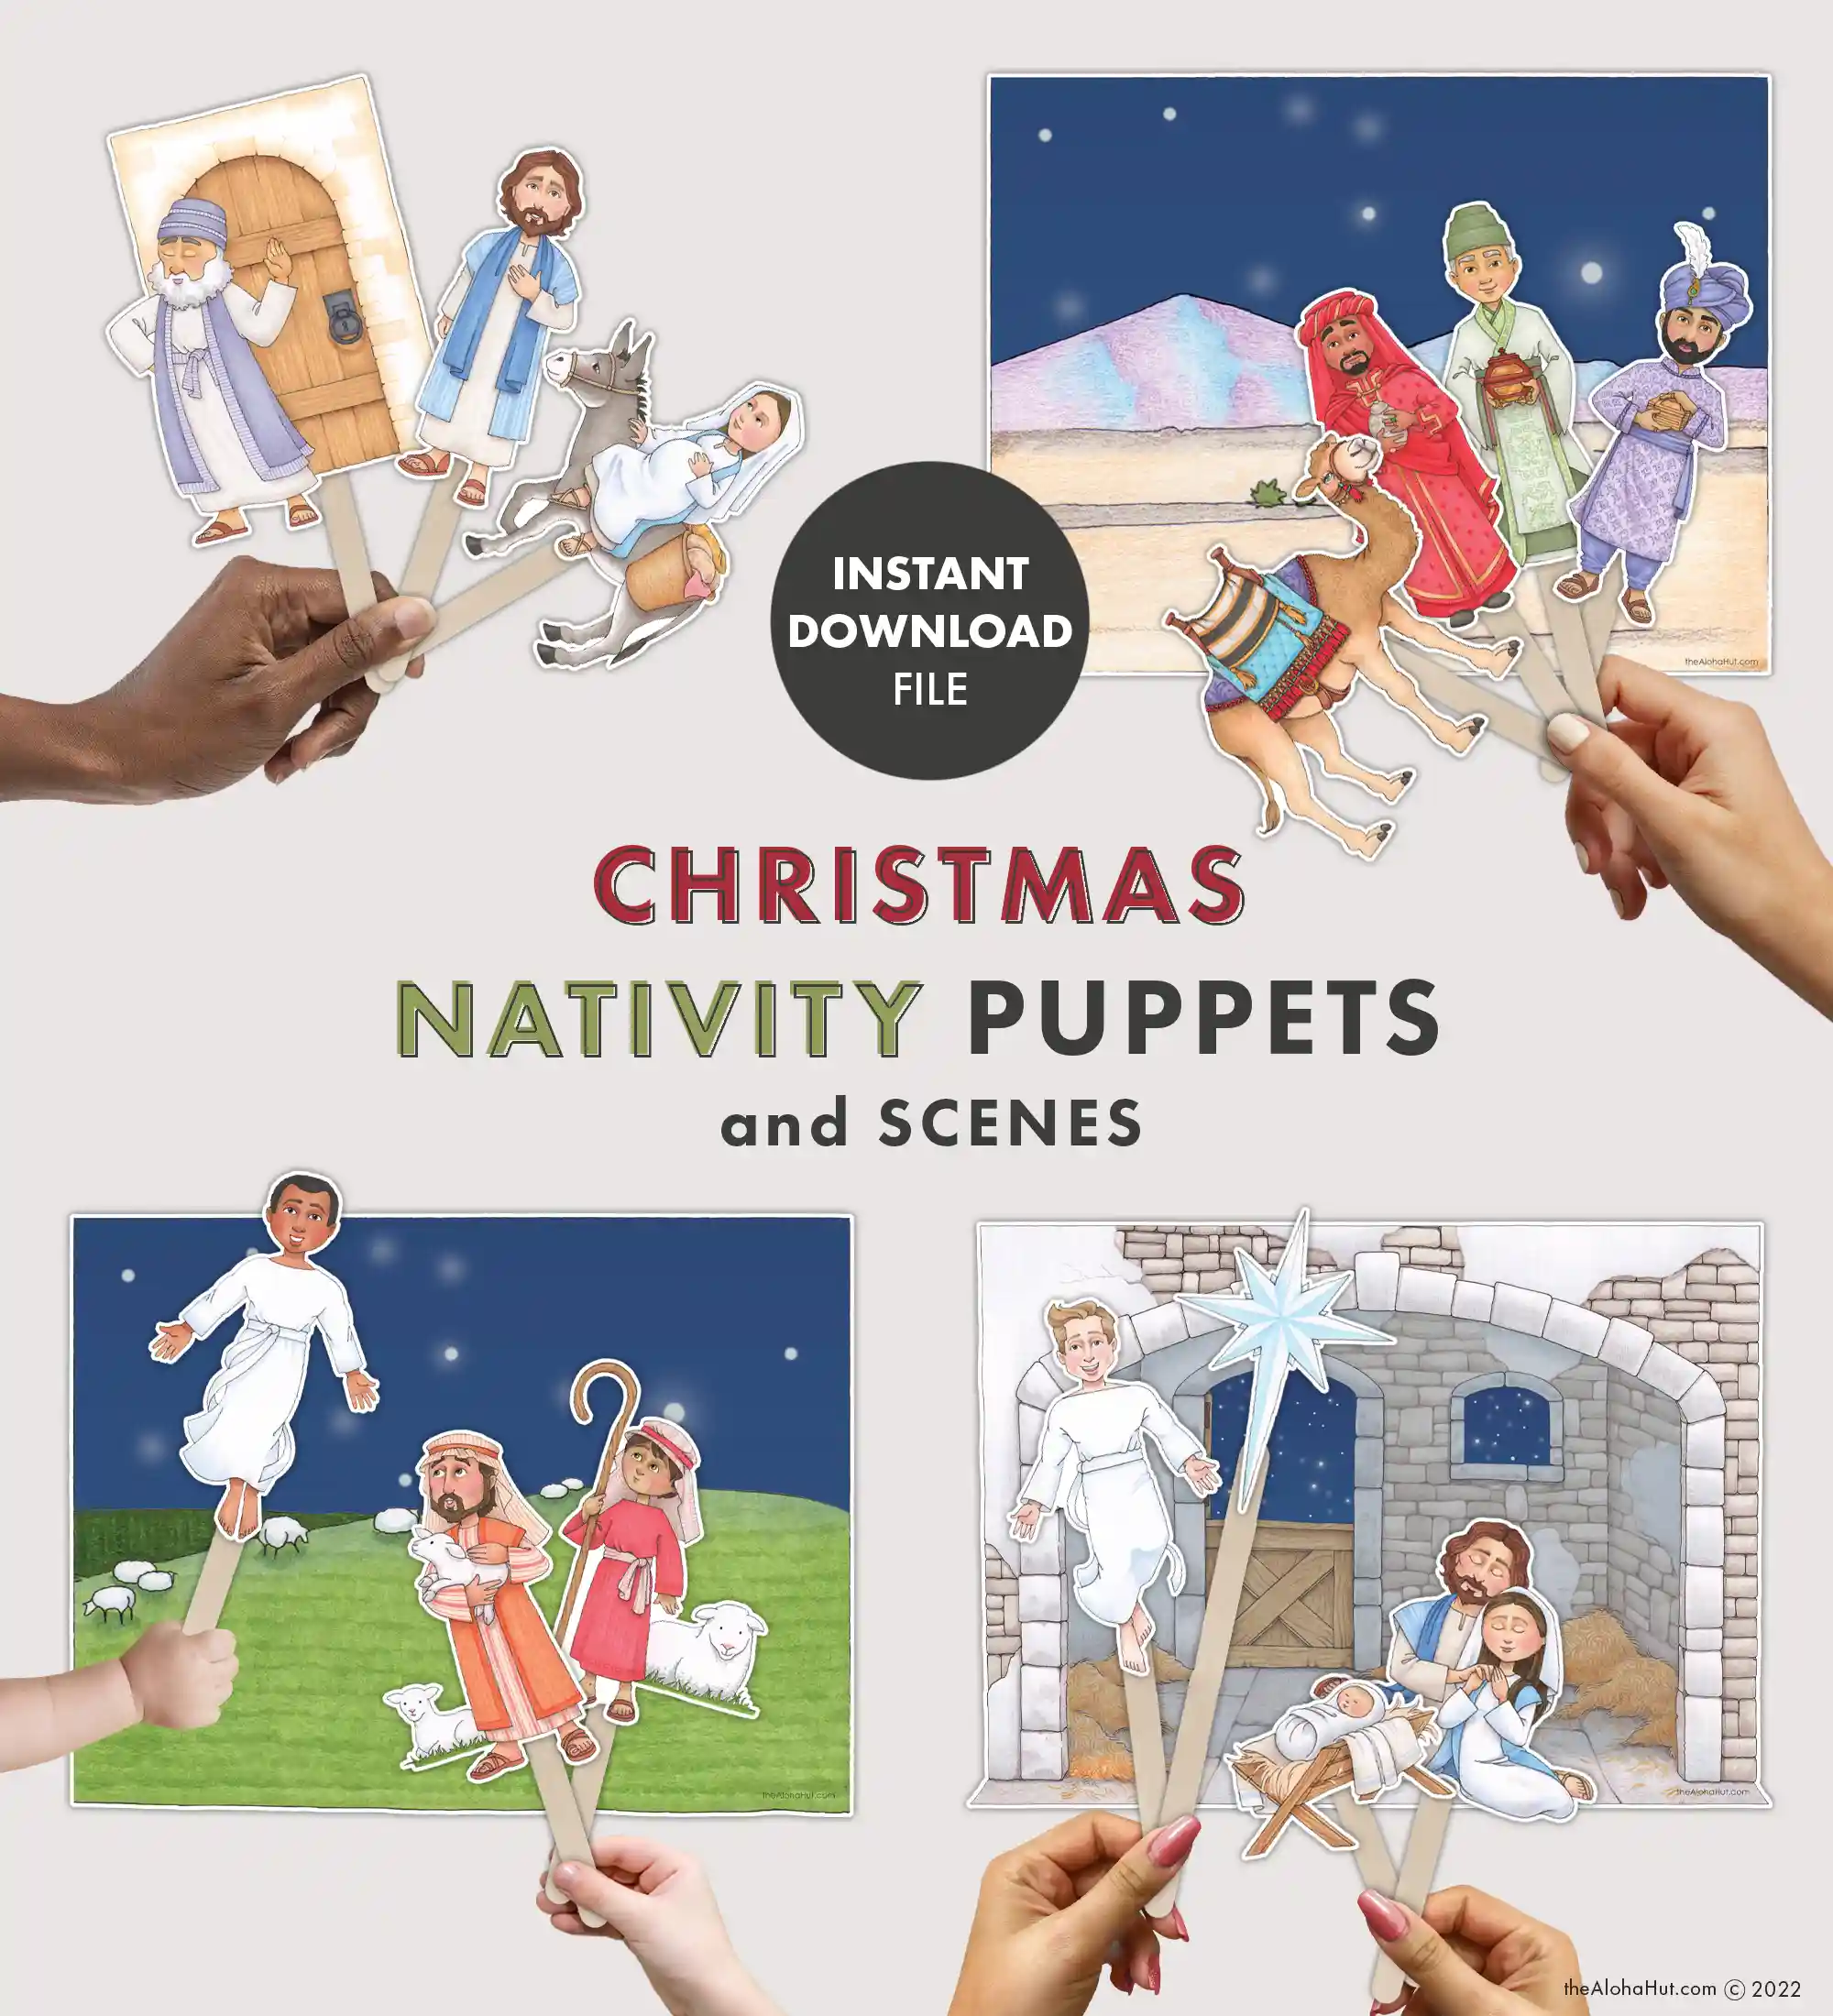 Christmas nativity puppets and scenes to help kids tell the Christmas story of the birth of Jesus Christ. Download the printable nativity puppets and scenes to add to your Christmas traditions in teaching about Christ's birth.